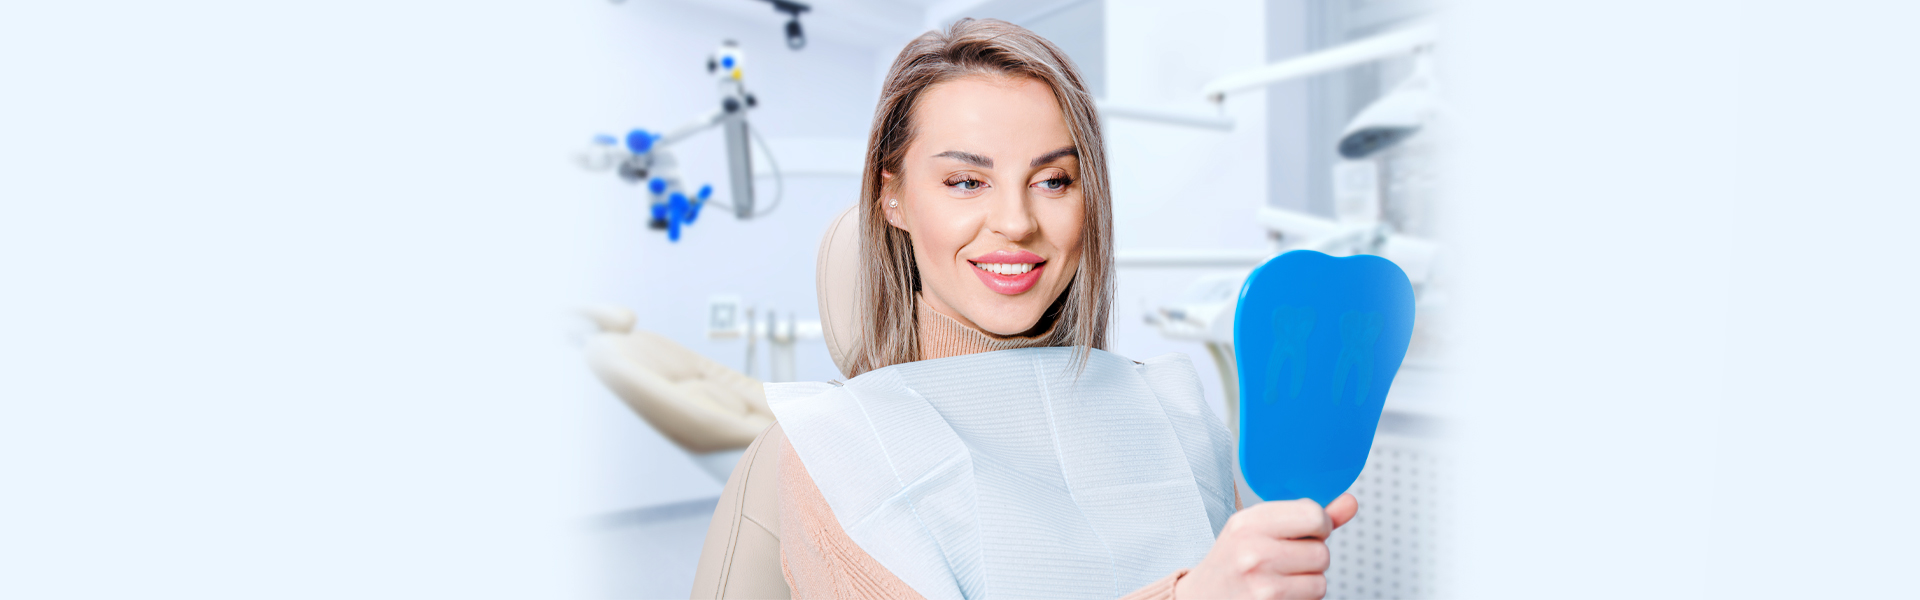 what-should-you-expect-during-your-routine-dental-checkup-exam-and-cleaning